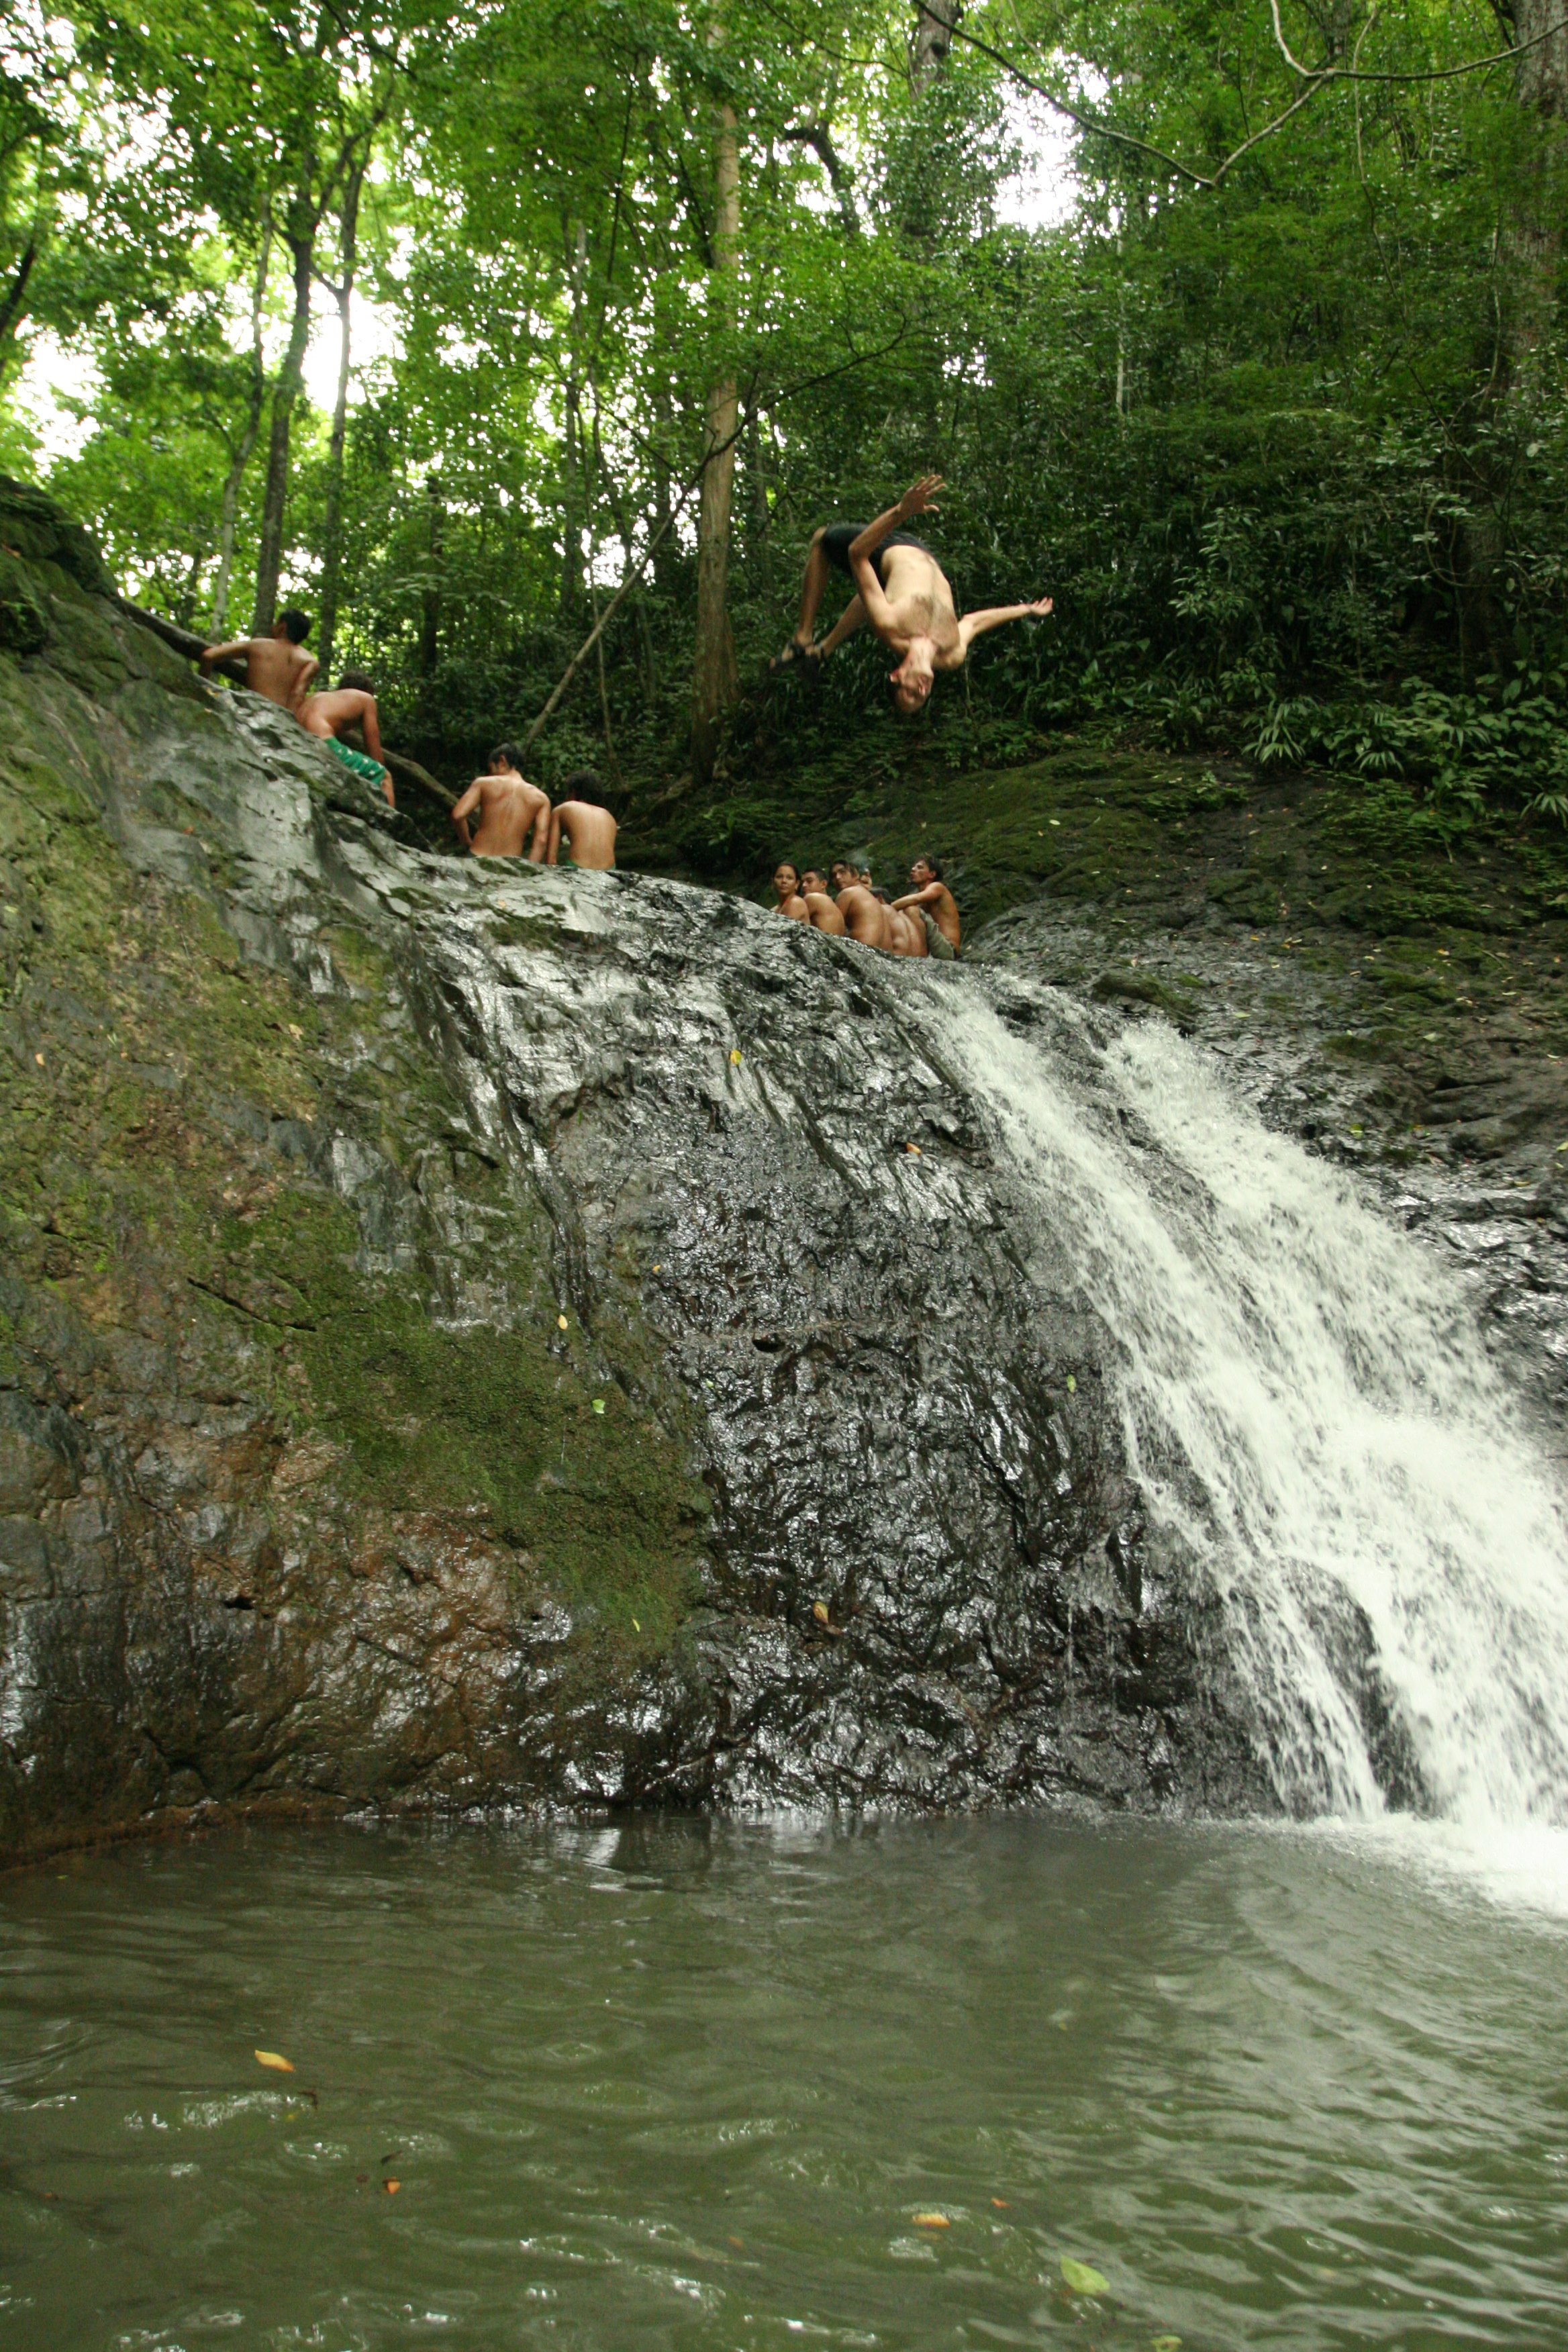 A visit to some Costa Rican waterfalls and zip-lines. 2007.